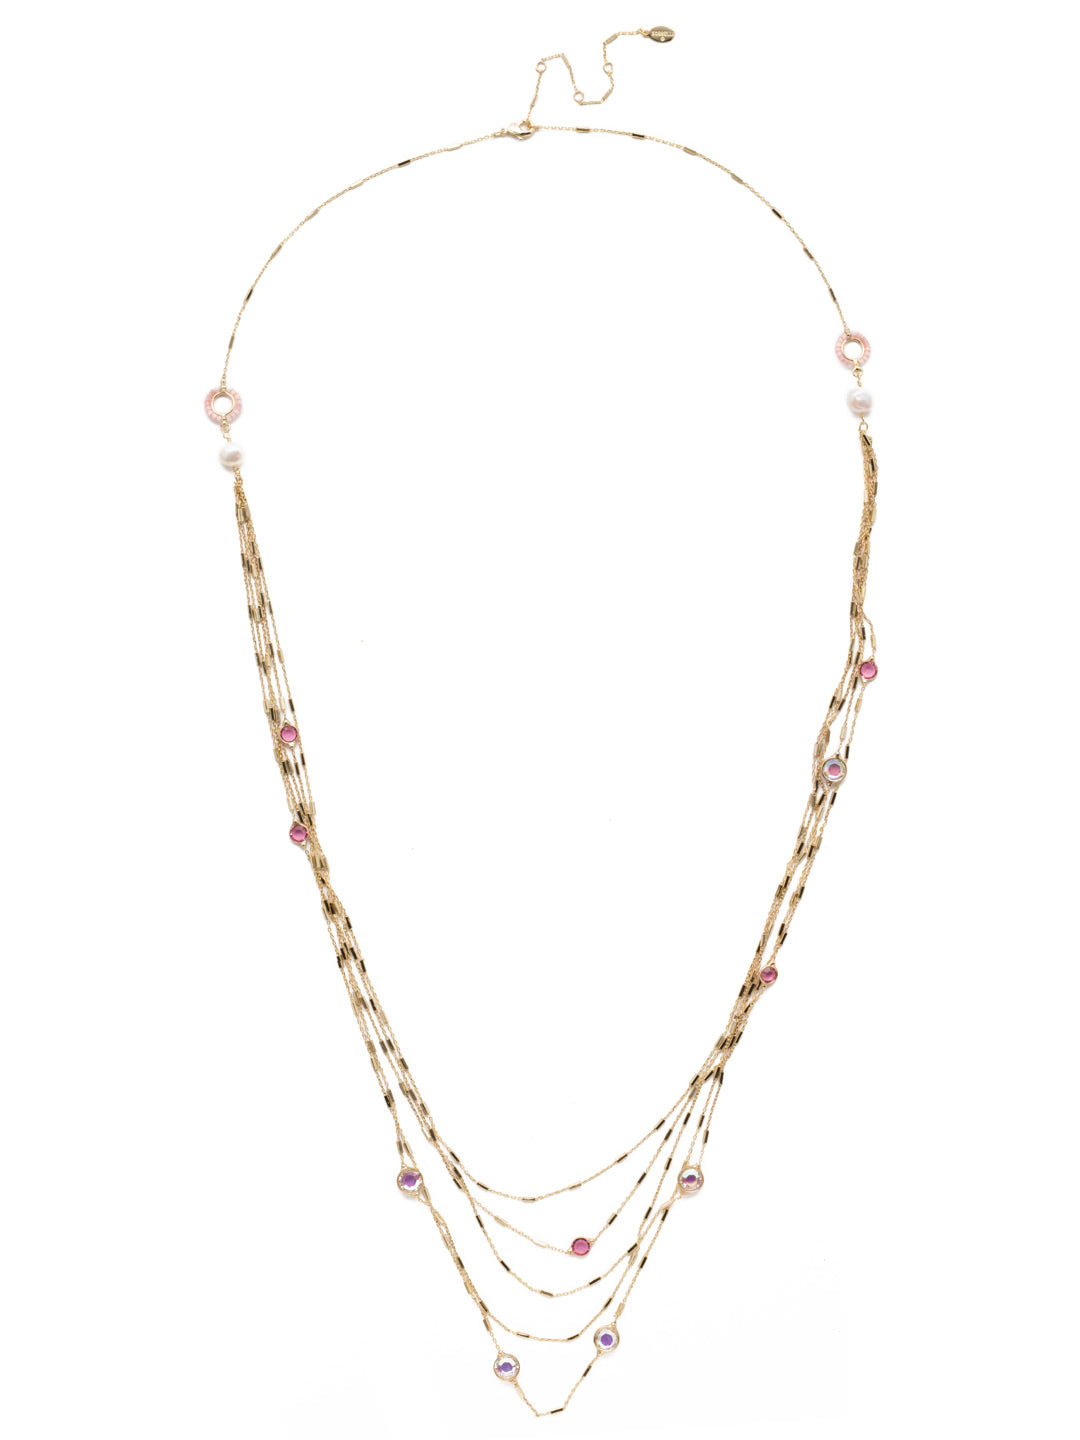 Luminous Layered Necklace - NEK2BGISS - <p>Fasten on layers of filagree, sparkling crystals and freshwater pearl accents with this long strand necklace and you're set and ready to walk into any room as an accessorizing star. From Sorrelli's Island Sun collection in our Bright Gold-tone finish.</p>